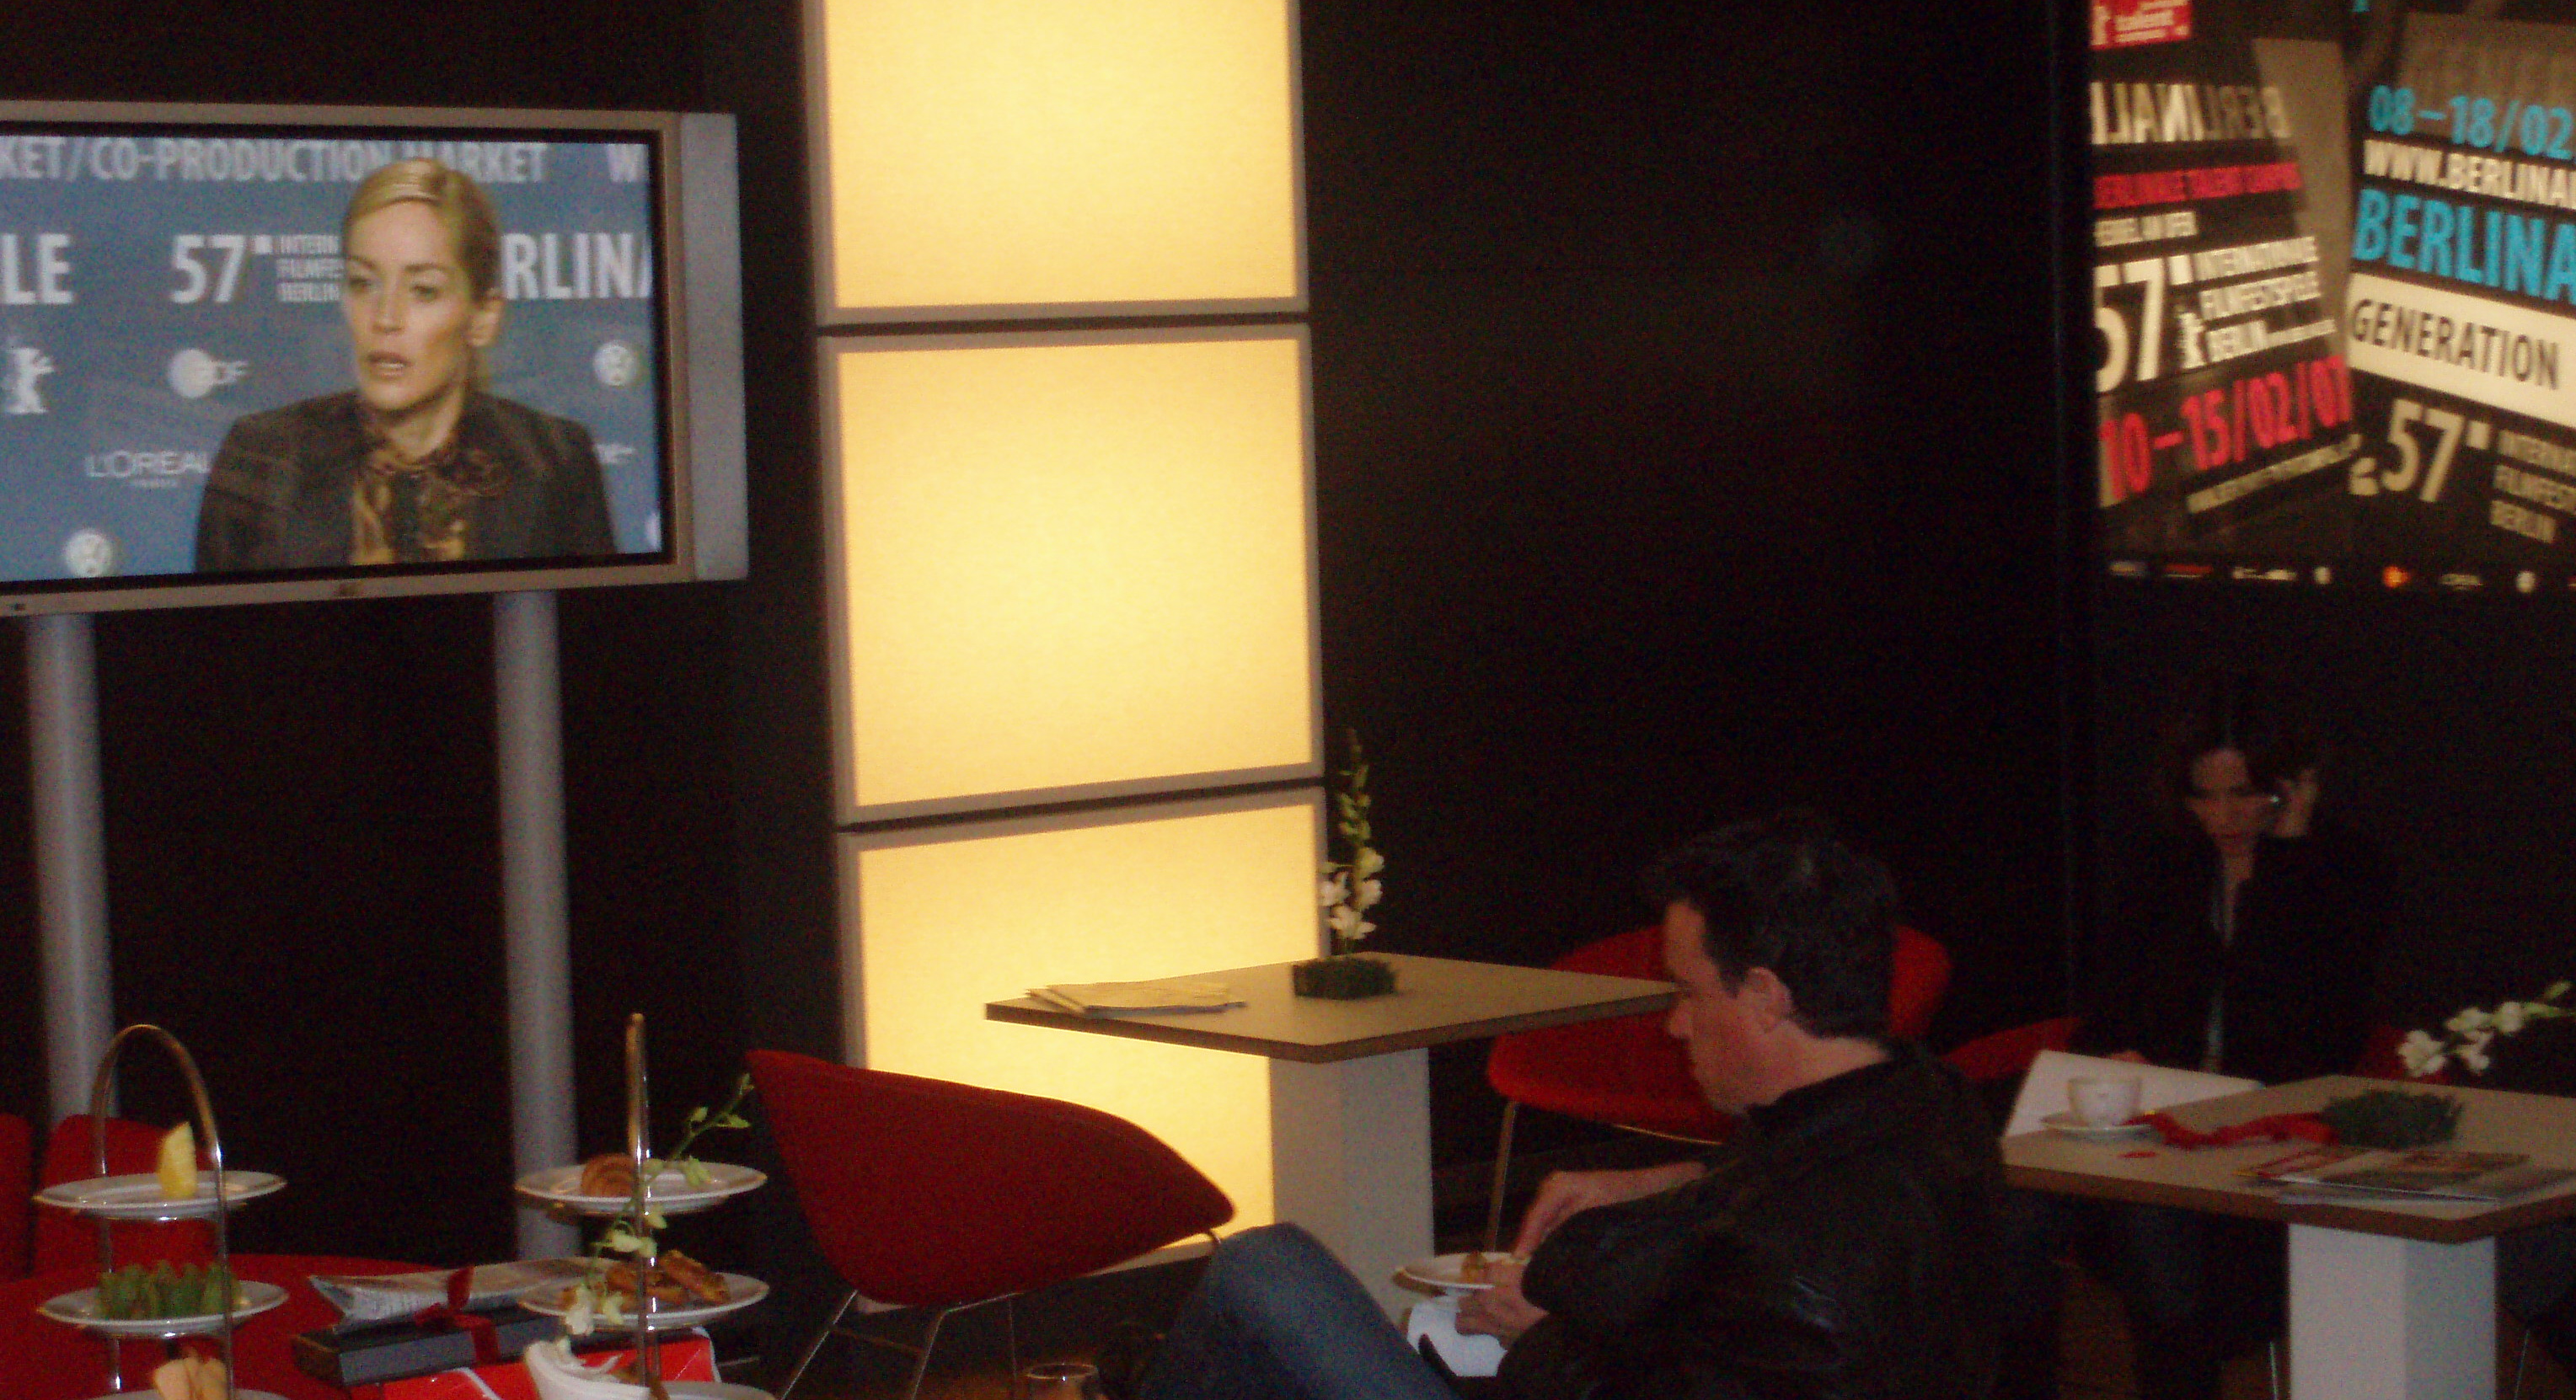 Reid in the VIP Green room at the Berlin Film Festival as Sharon Stone conducts TV interviews